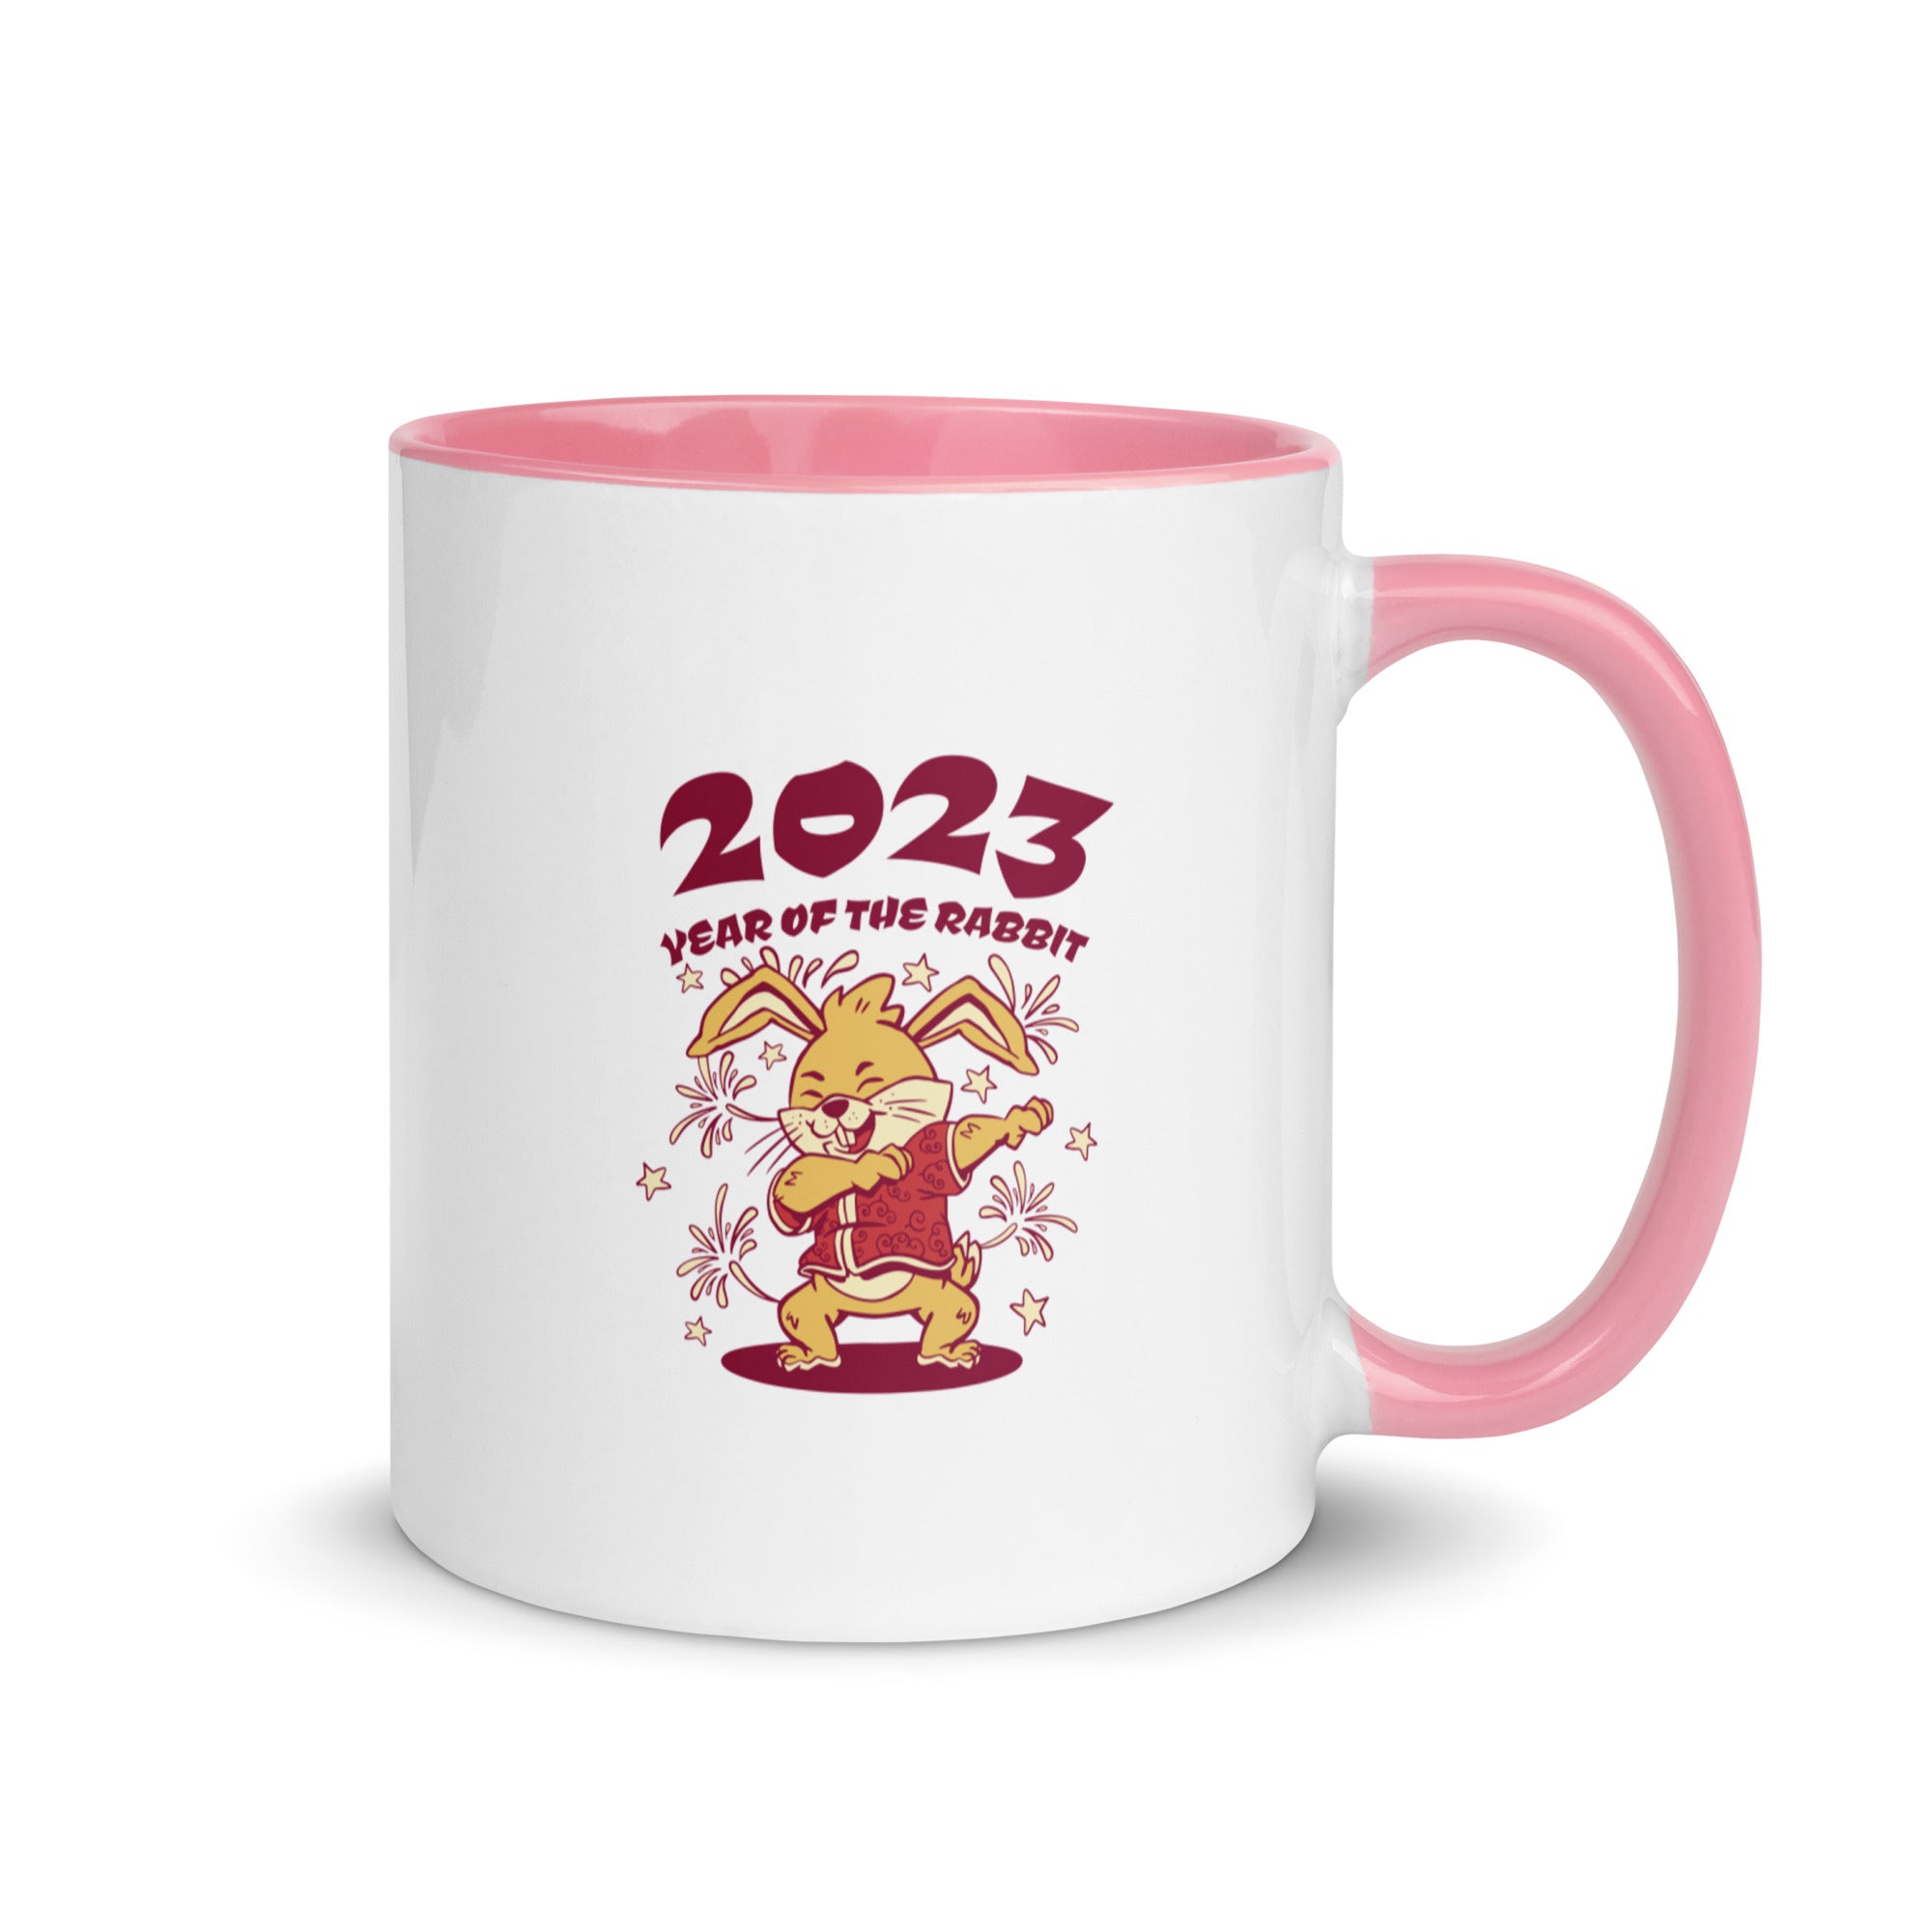 Mug with Color Inside | 2023 Year of the Rabbit